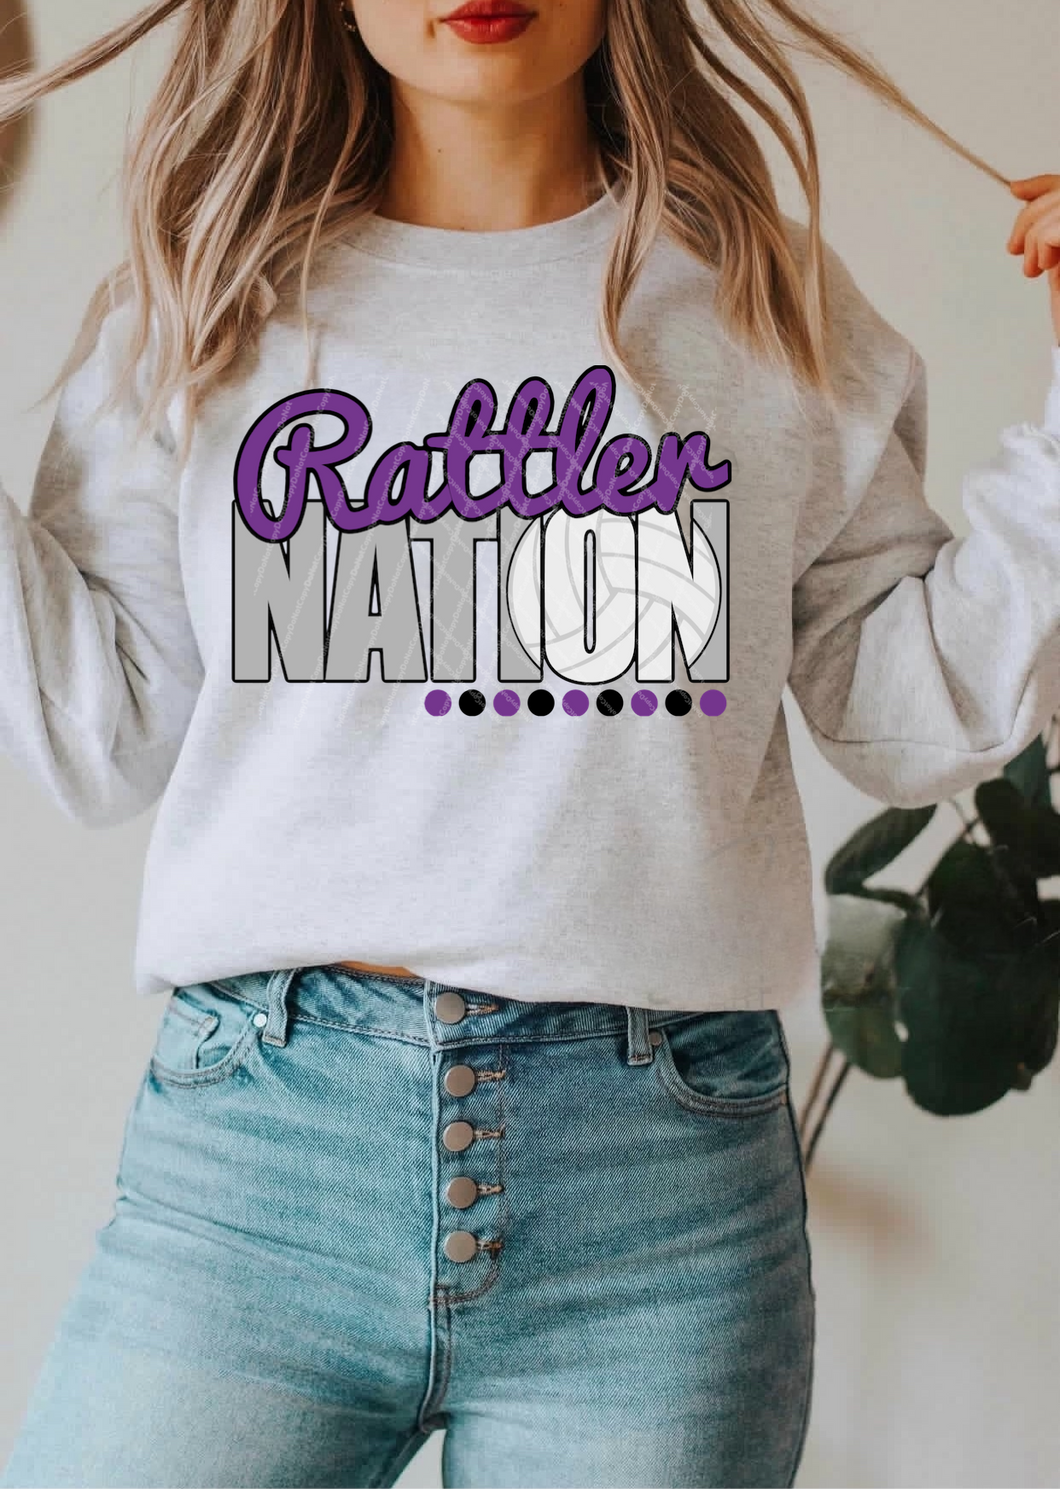 Rattler Nation w/ Volleyball - Purple & Black Text - 12 Color Options